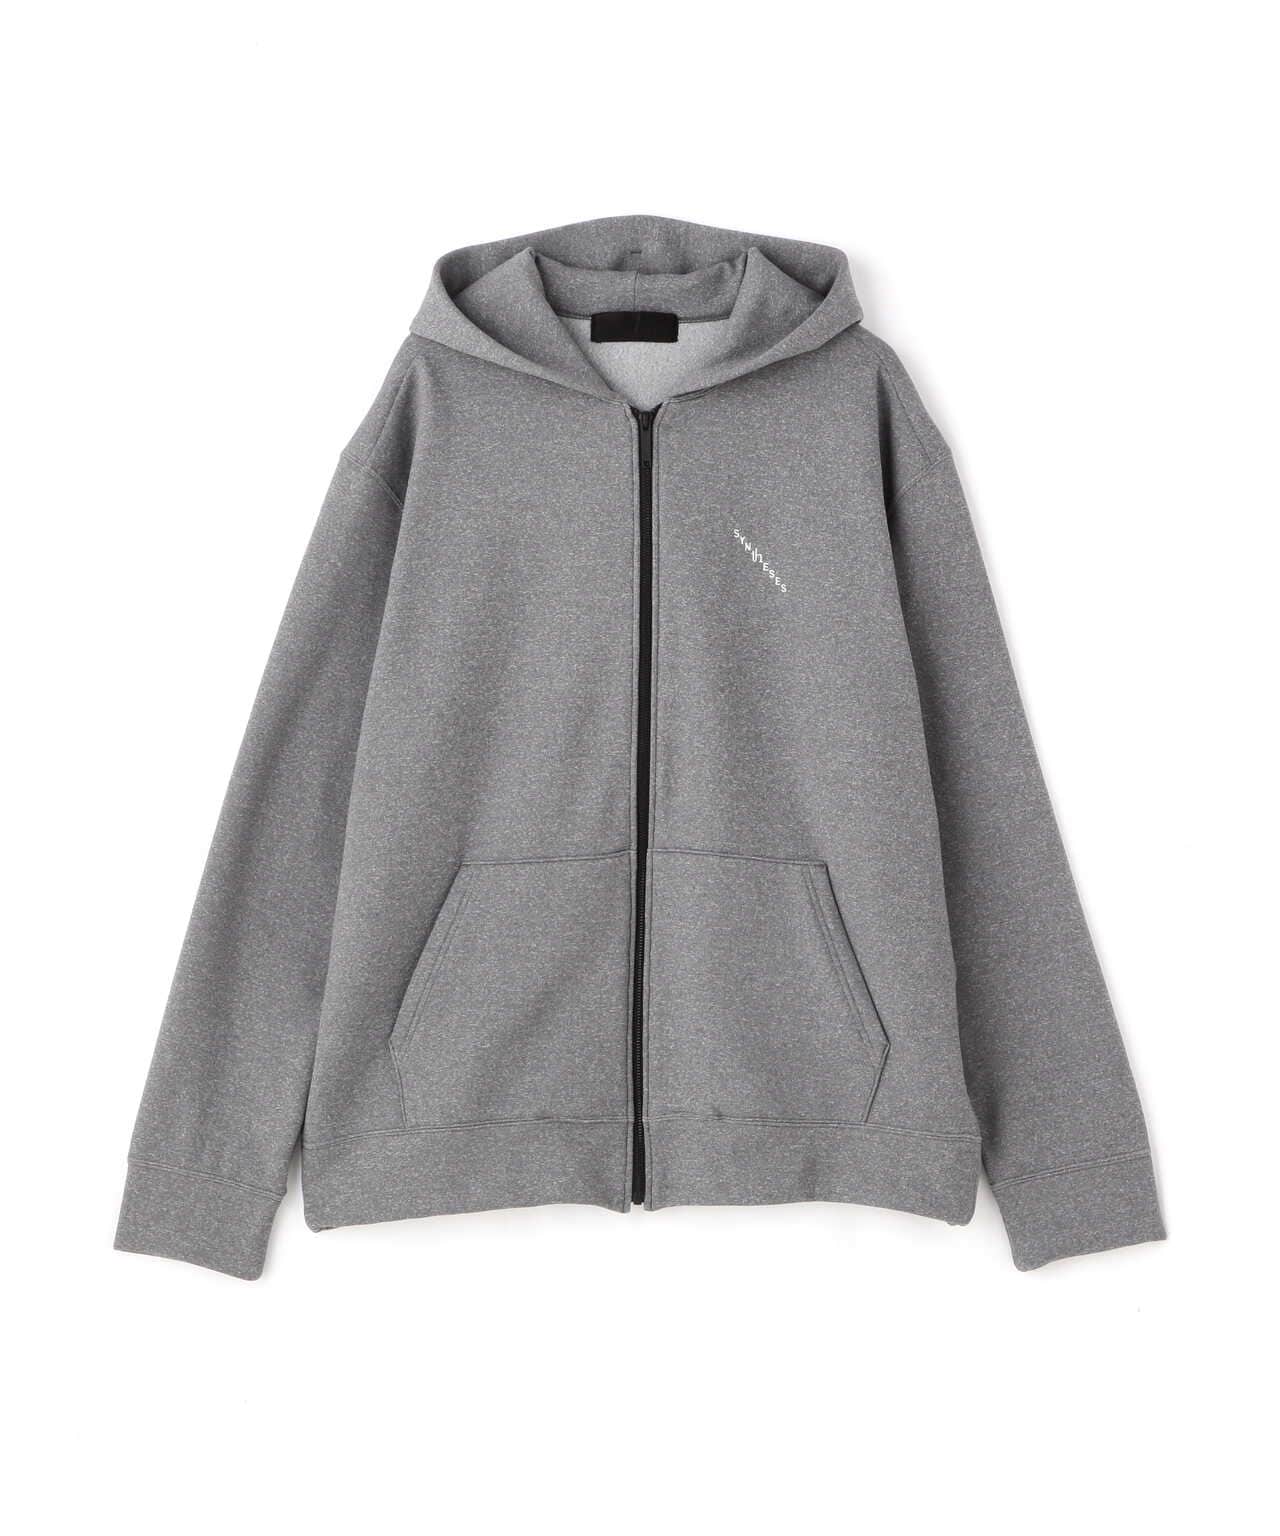 th.products/ティーエイチプロダクツ/Relax Fit Zip Up Parka/ジップ